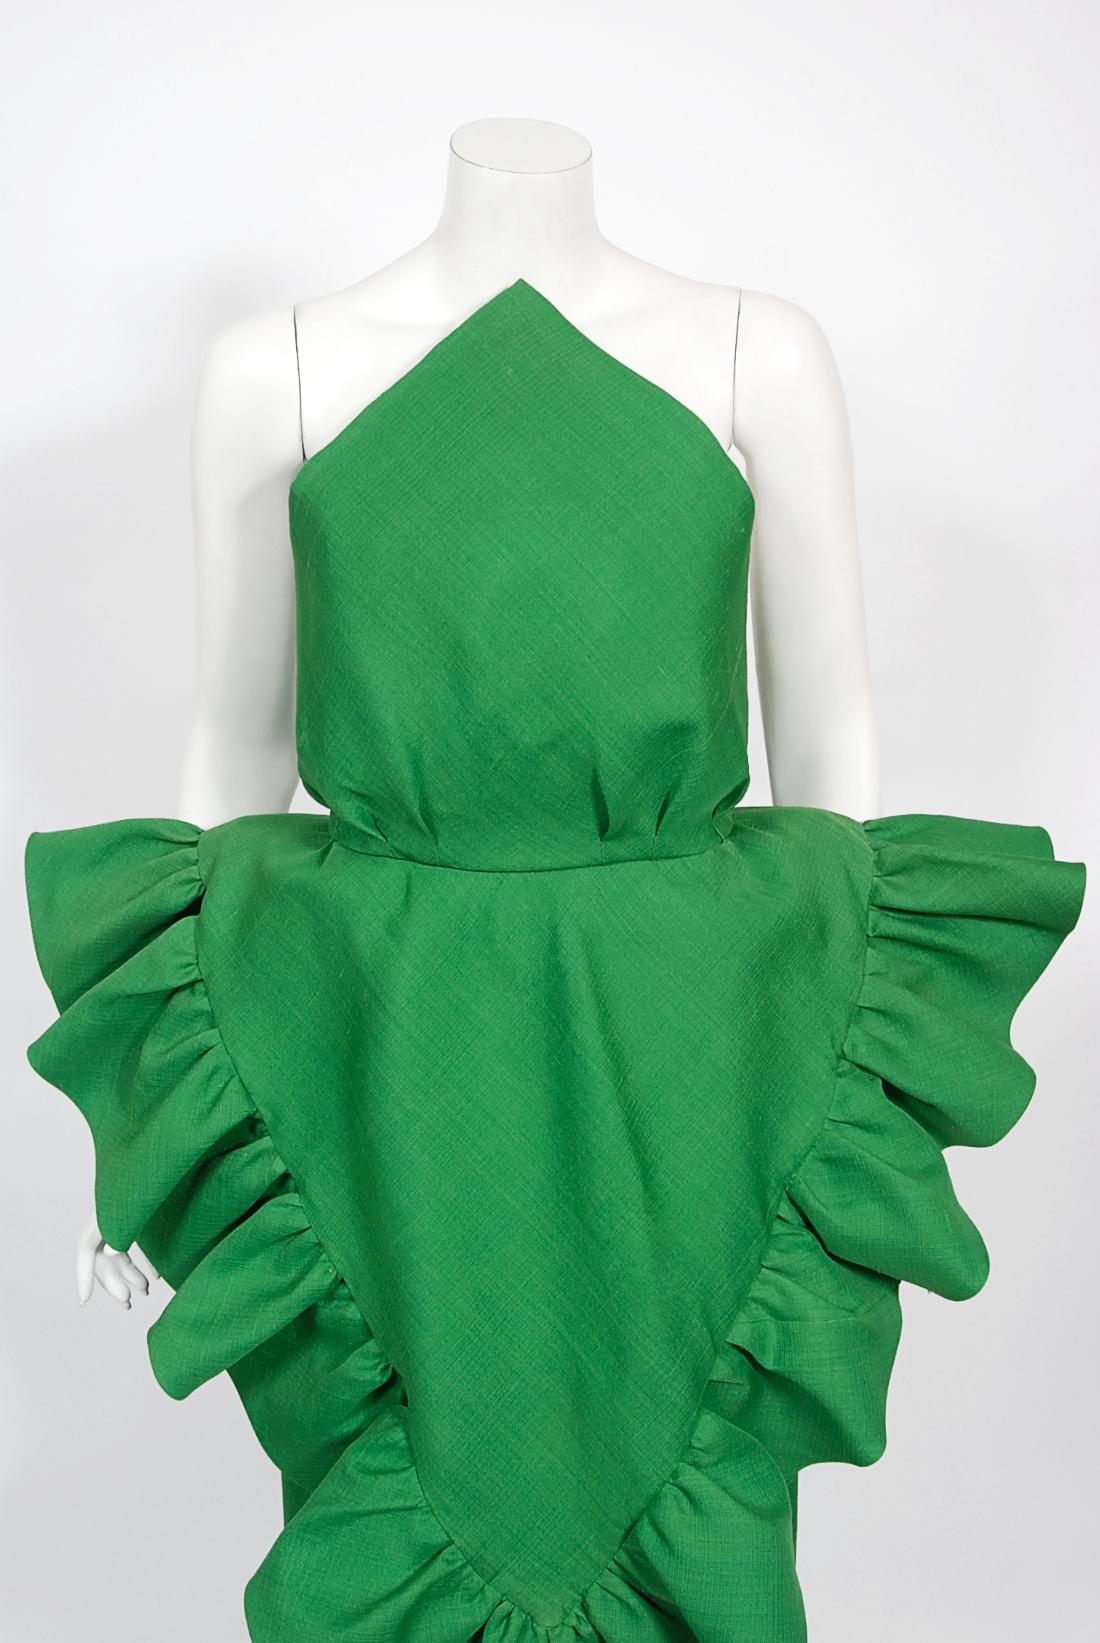 An absolutely spectacular, museum quality Pierre Cardin haute couture emerald green 'leaf' strapless bustier gown dating back to his spring-summer 1987 collection. In 1951 Cardin opened his own couture house and by 1957, he started a ready-to-wear